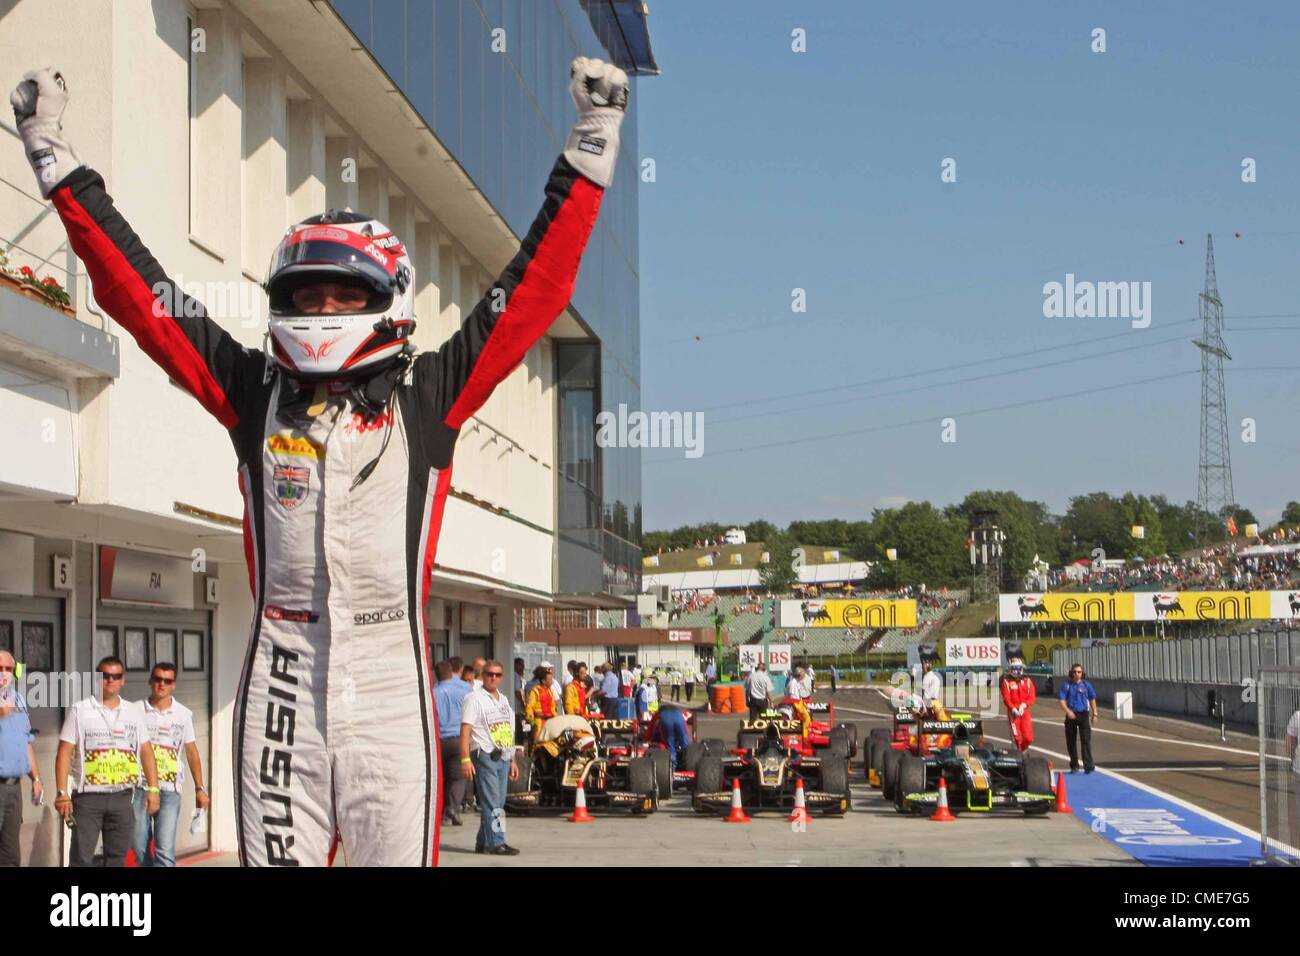 28.07.2012. Budapest, Hungary. FIA GP2  Motor racing.  Max Chilton wins his first ever GP2 race with Carlin Stock Photo